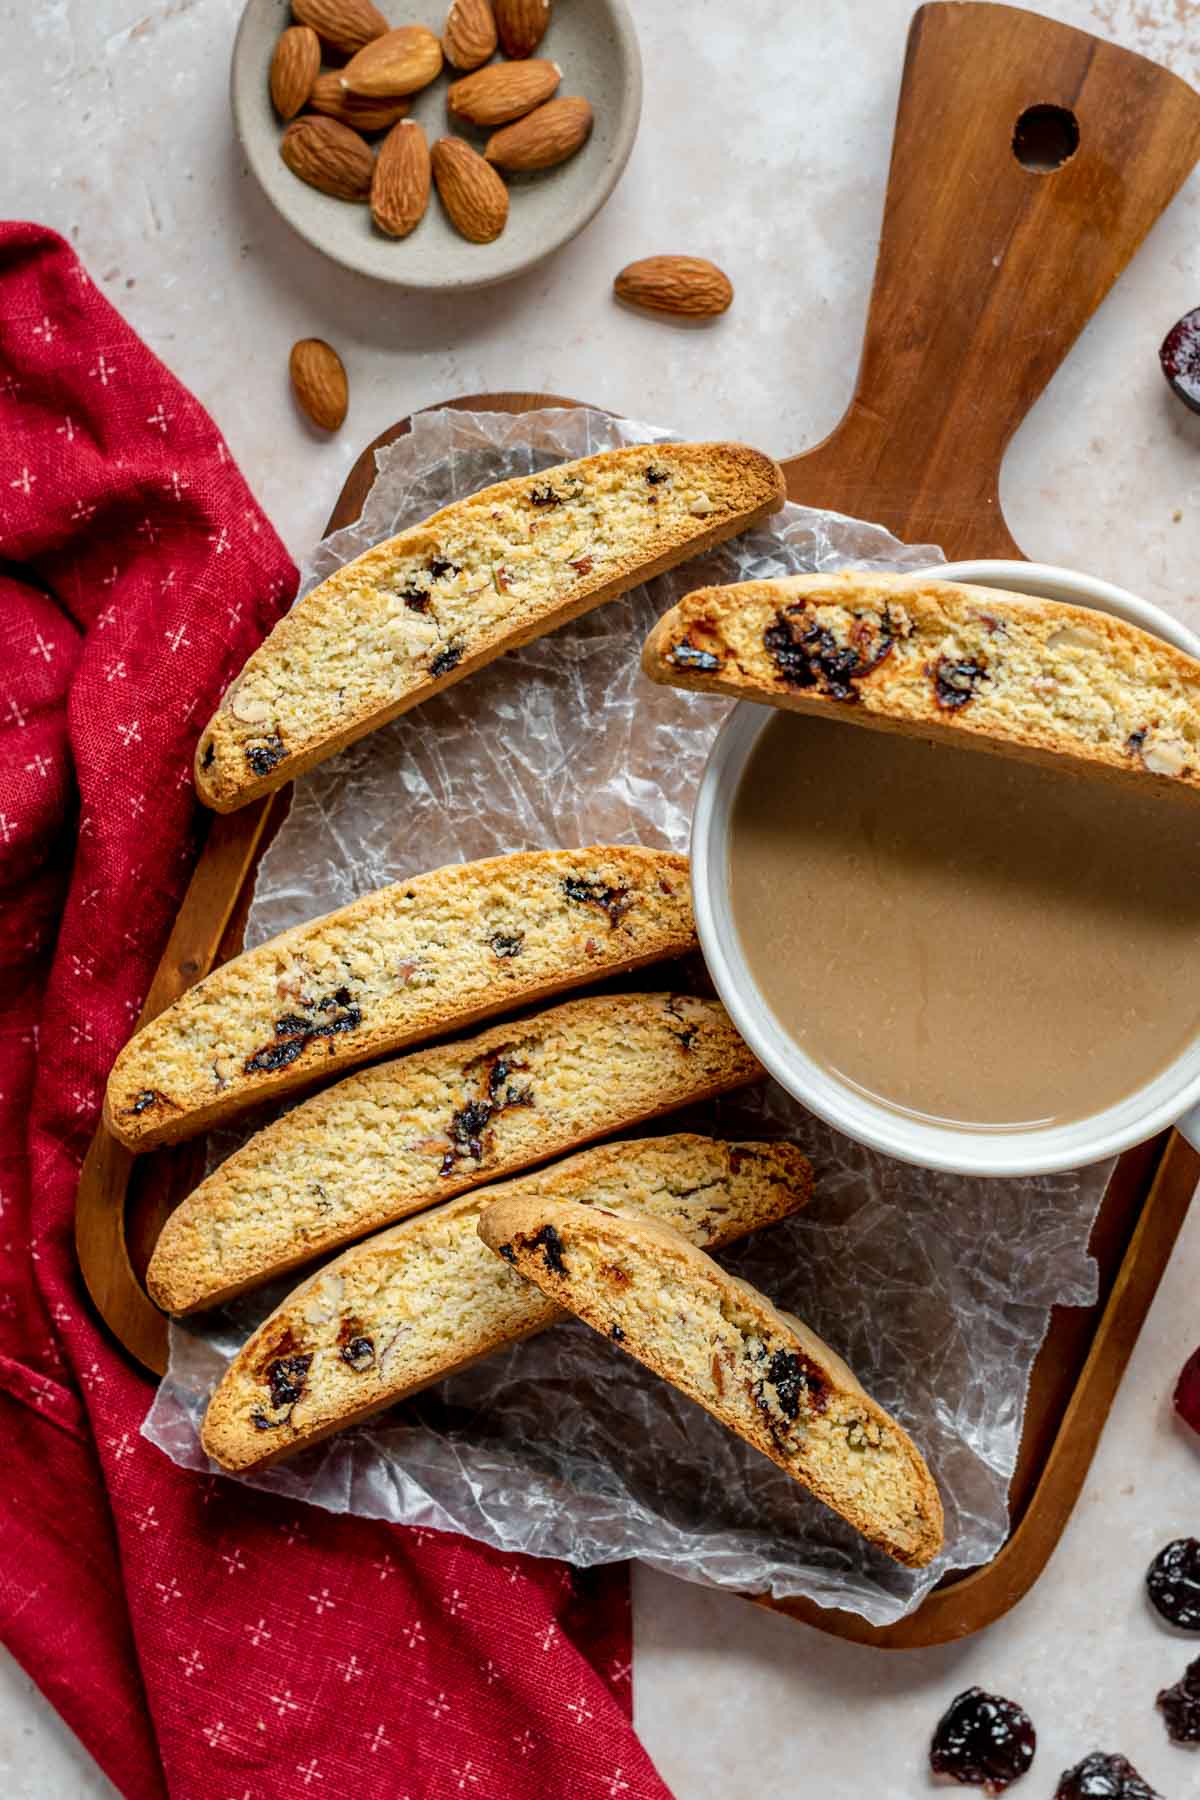 Cherry Almond Biscotti baked cookies resting on coffee cup and serving tray